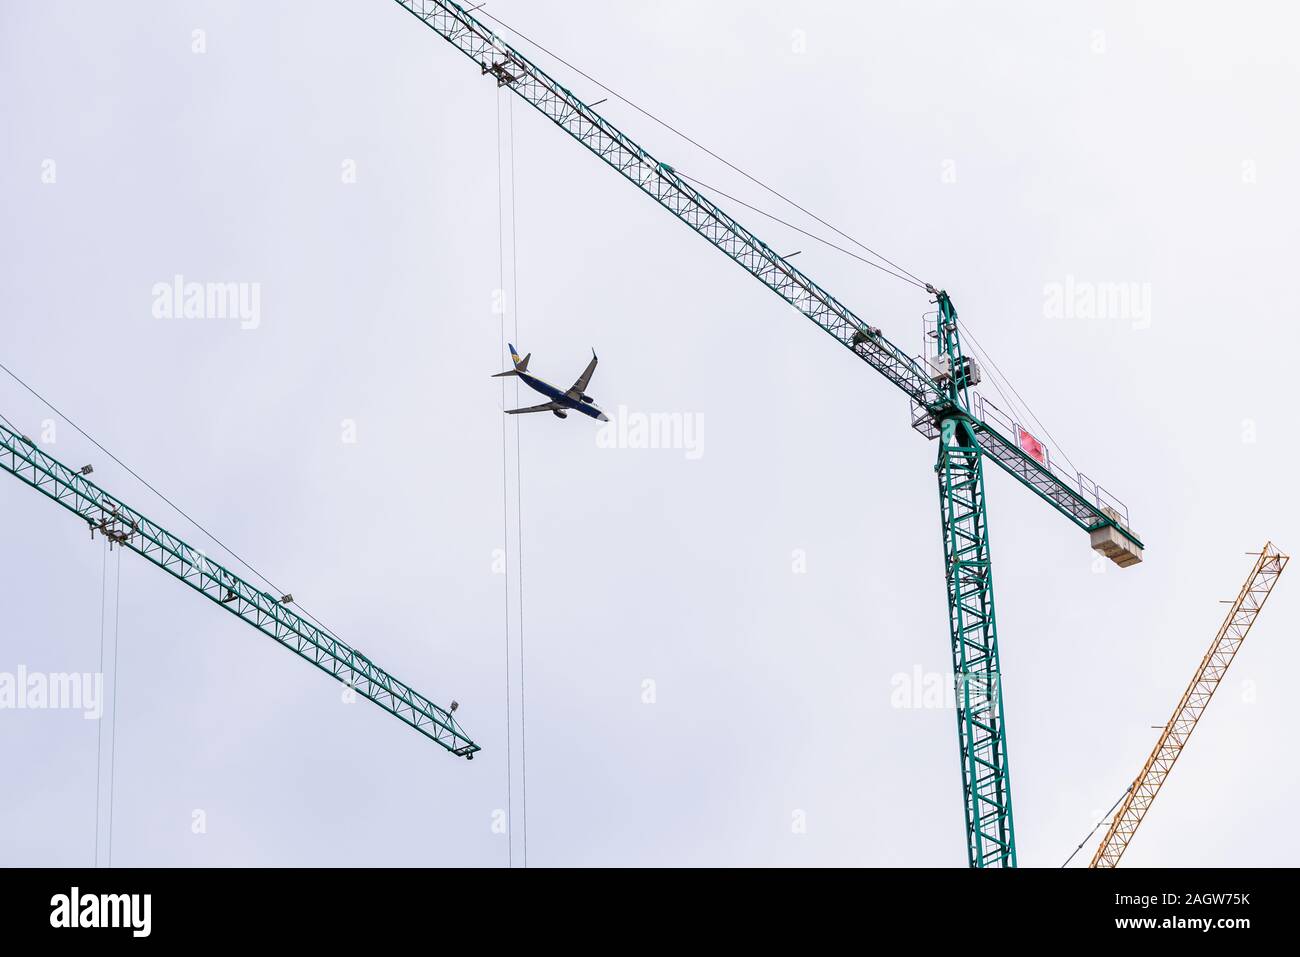 Valencia, Spain - December 20, 2019: Ryanair plane flies over the city framed among building construction cranes, cities grow with tourism. Stock Photo